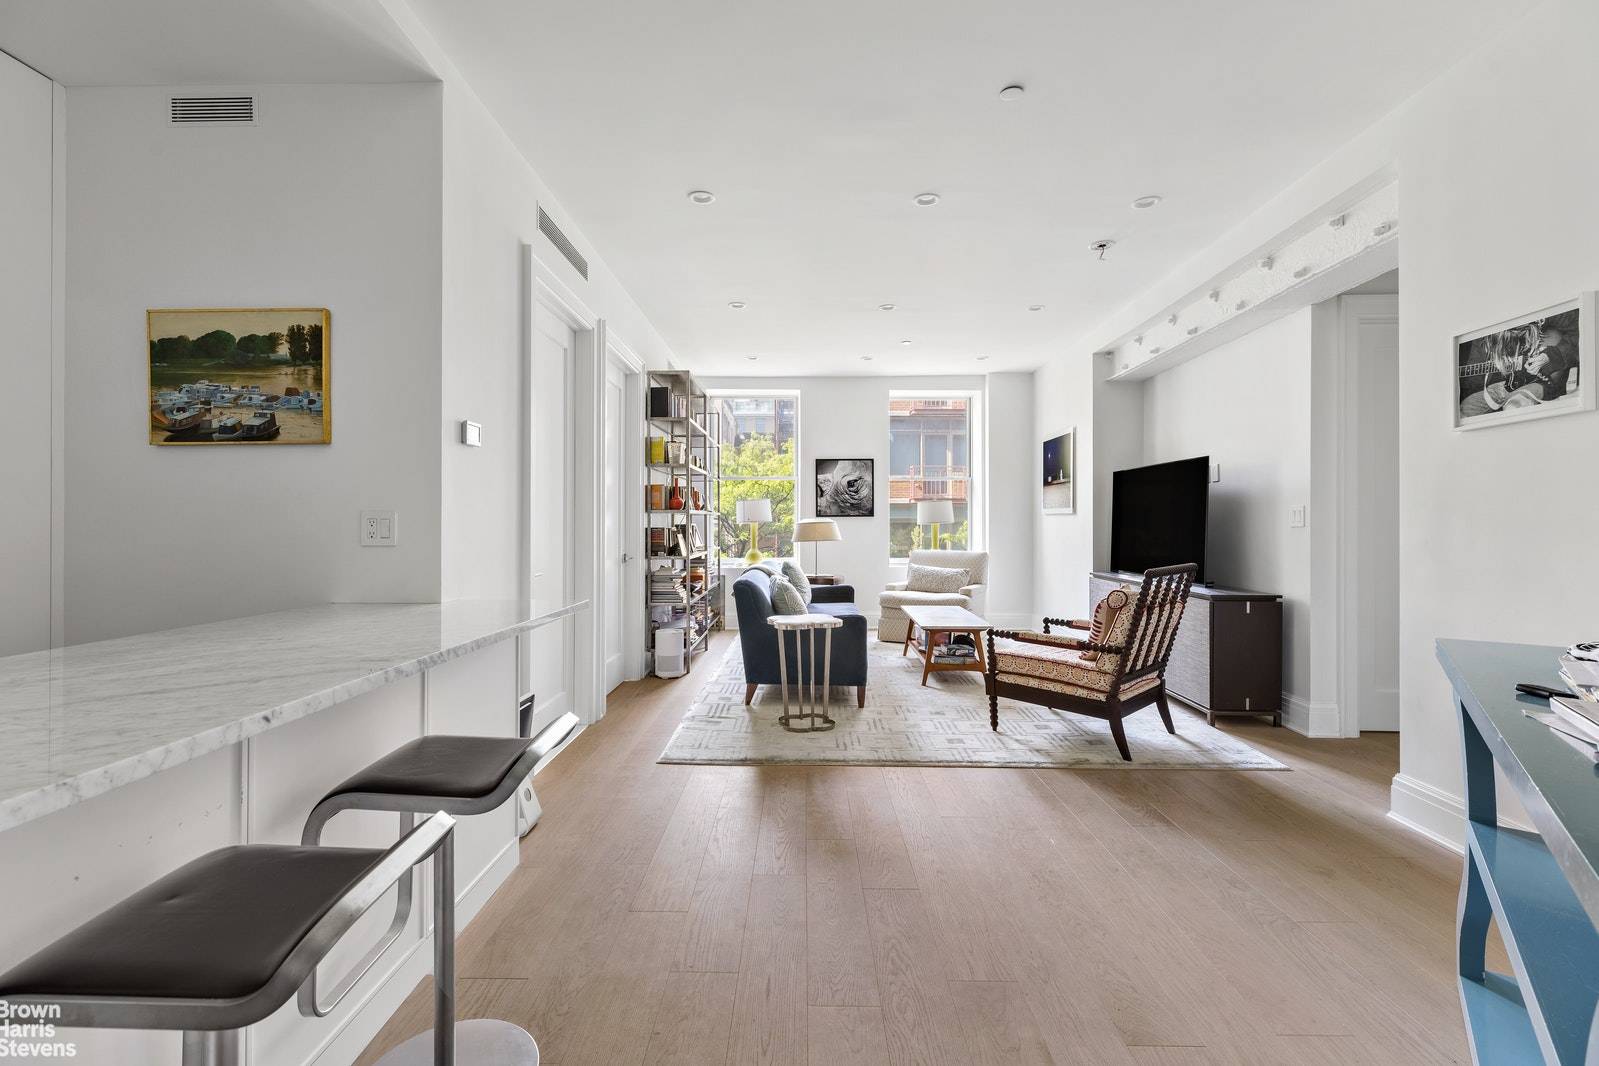 This flawless recently gut renovated sunny three bedroom, two bathroom loft style residence in a former 1800s warehouse on a quiet tree lined street features high ceilings, 6 oversized windows, ...